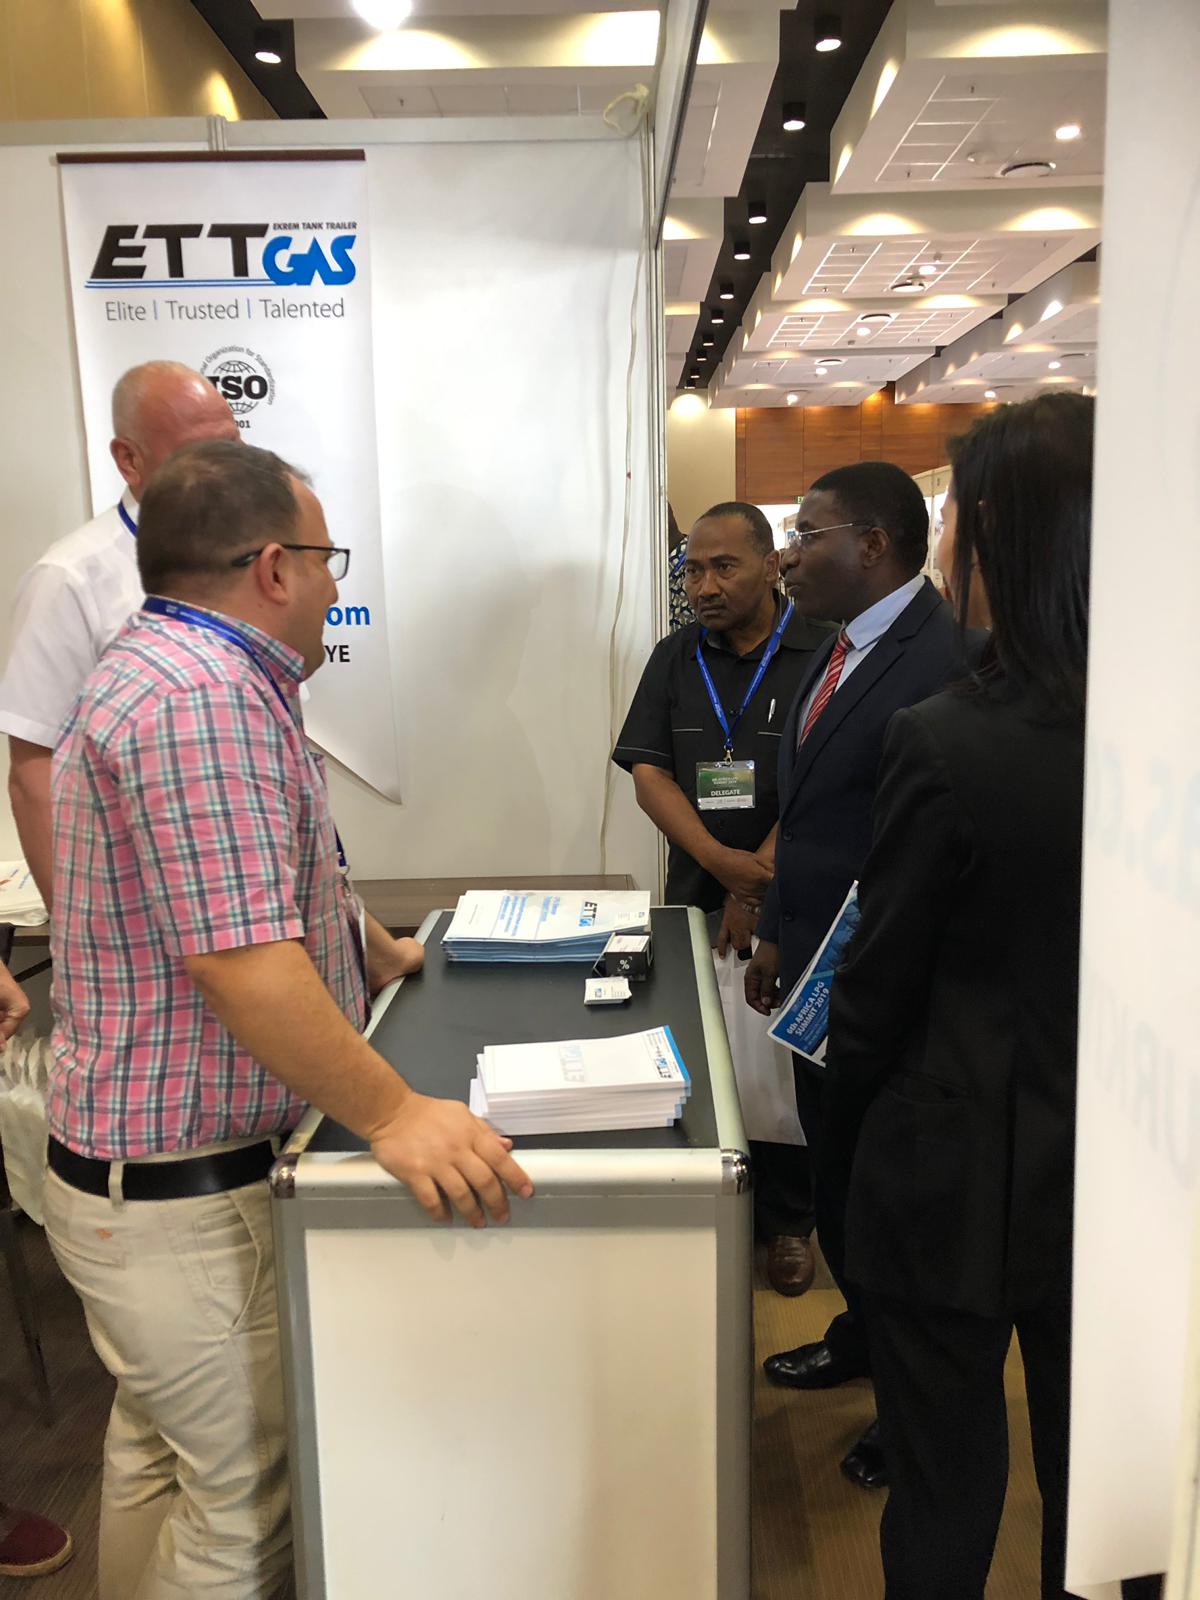 We attended the Lpg Summit fair in Tanzania on 3-4 July